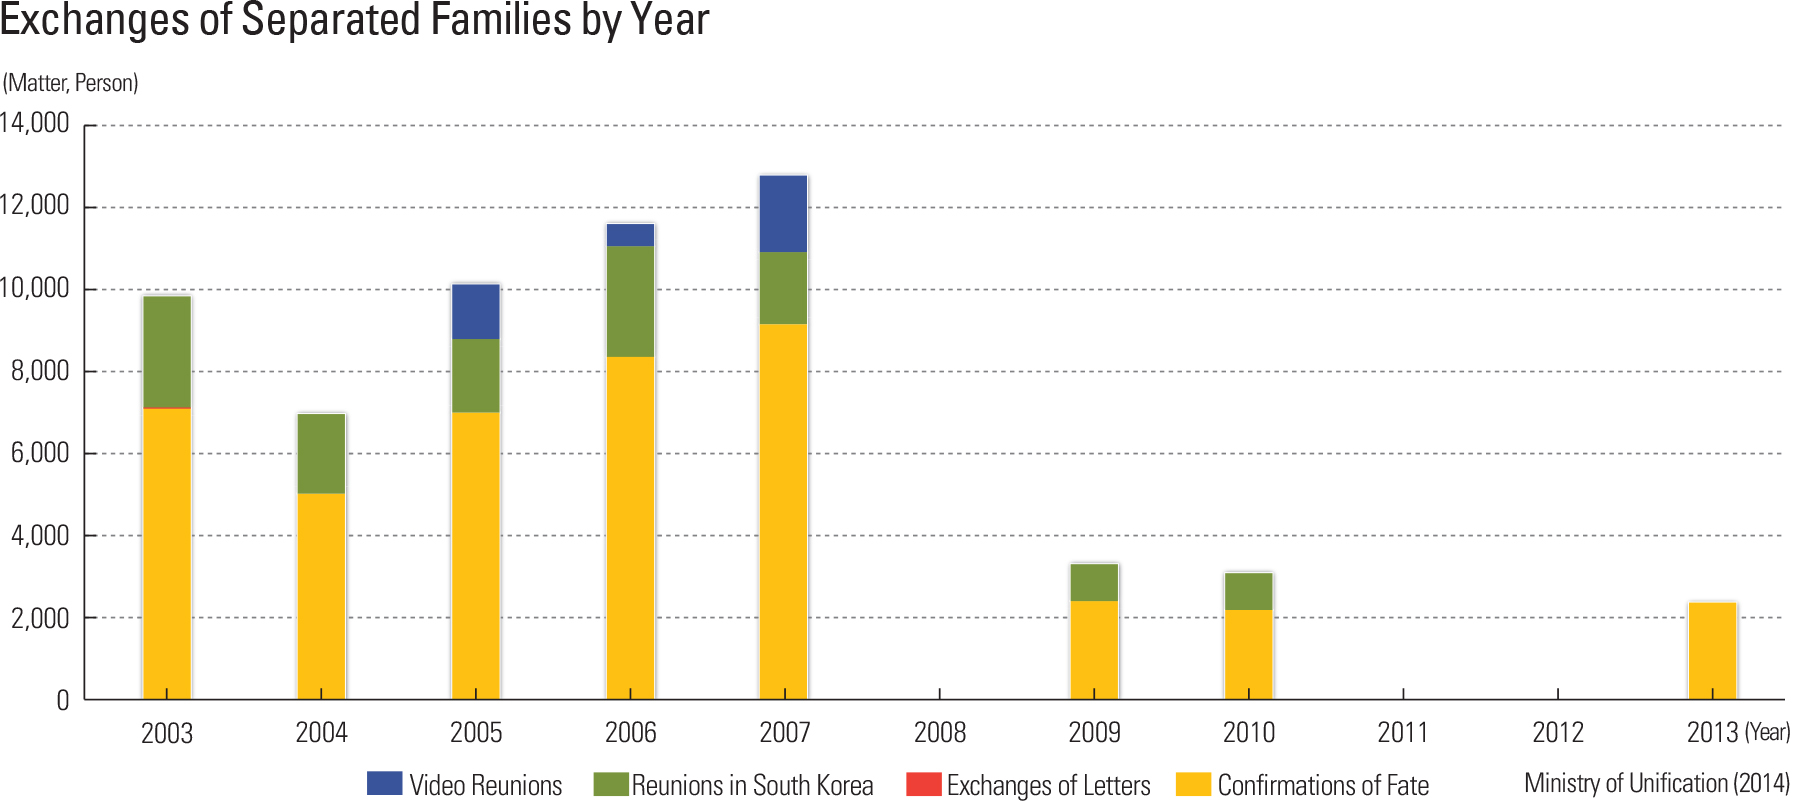  Exchanges of Separated Families by Year